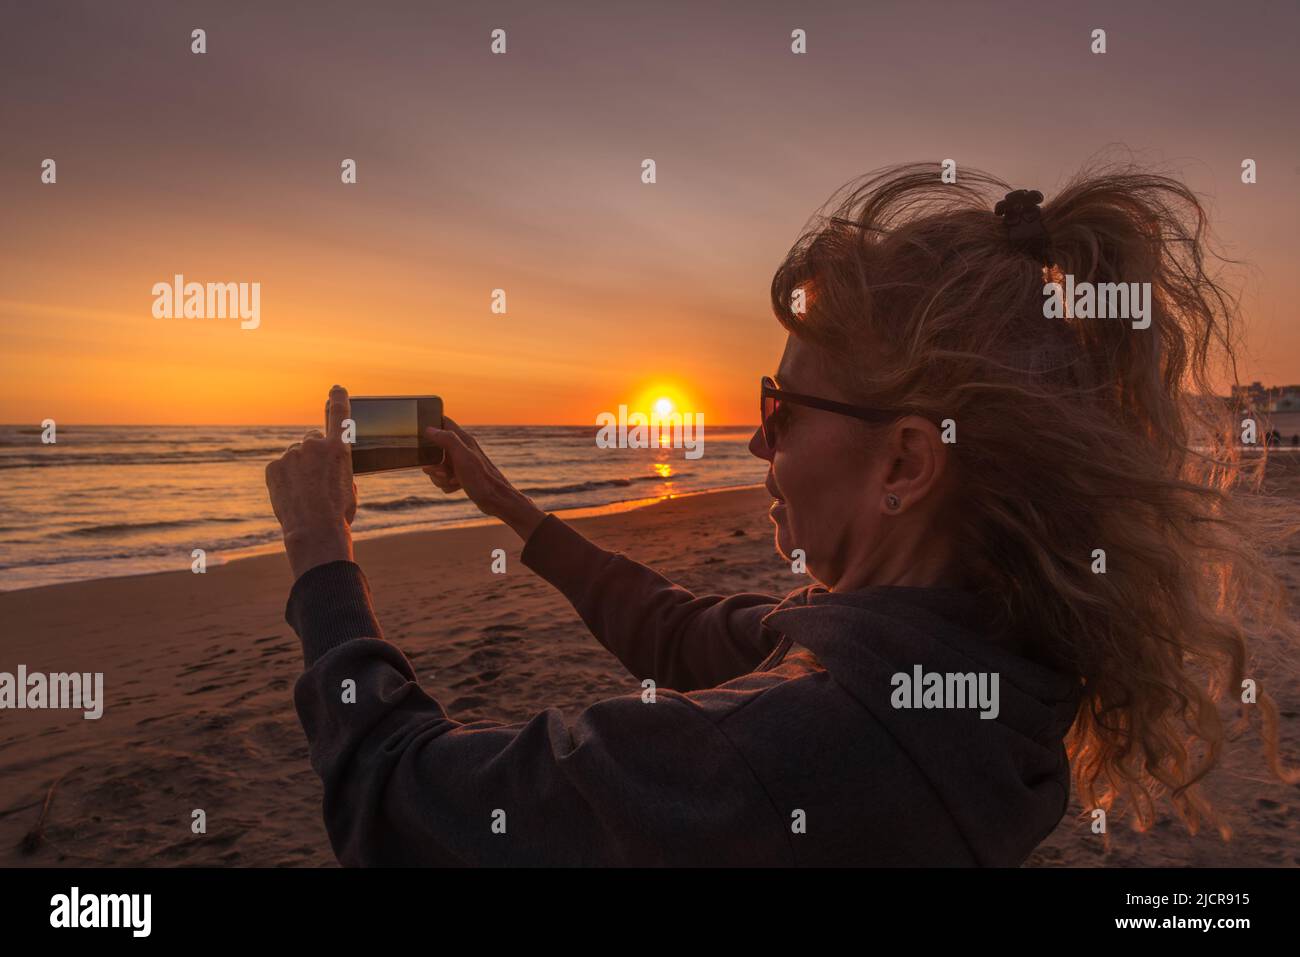 Mature woman taking a photo with her smartphone at sunset with the sun over the sea. Stock Photo